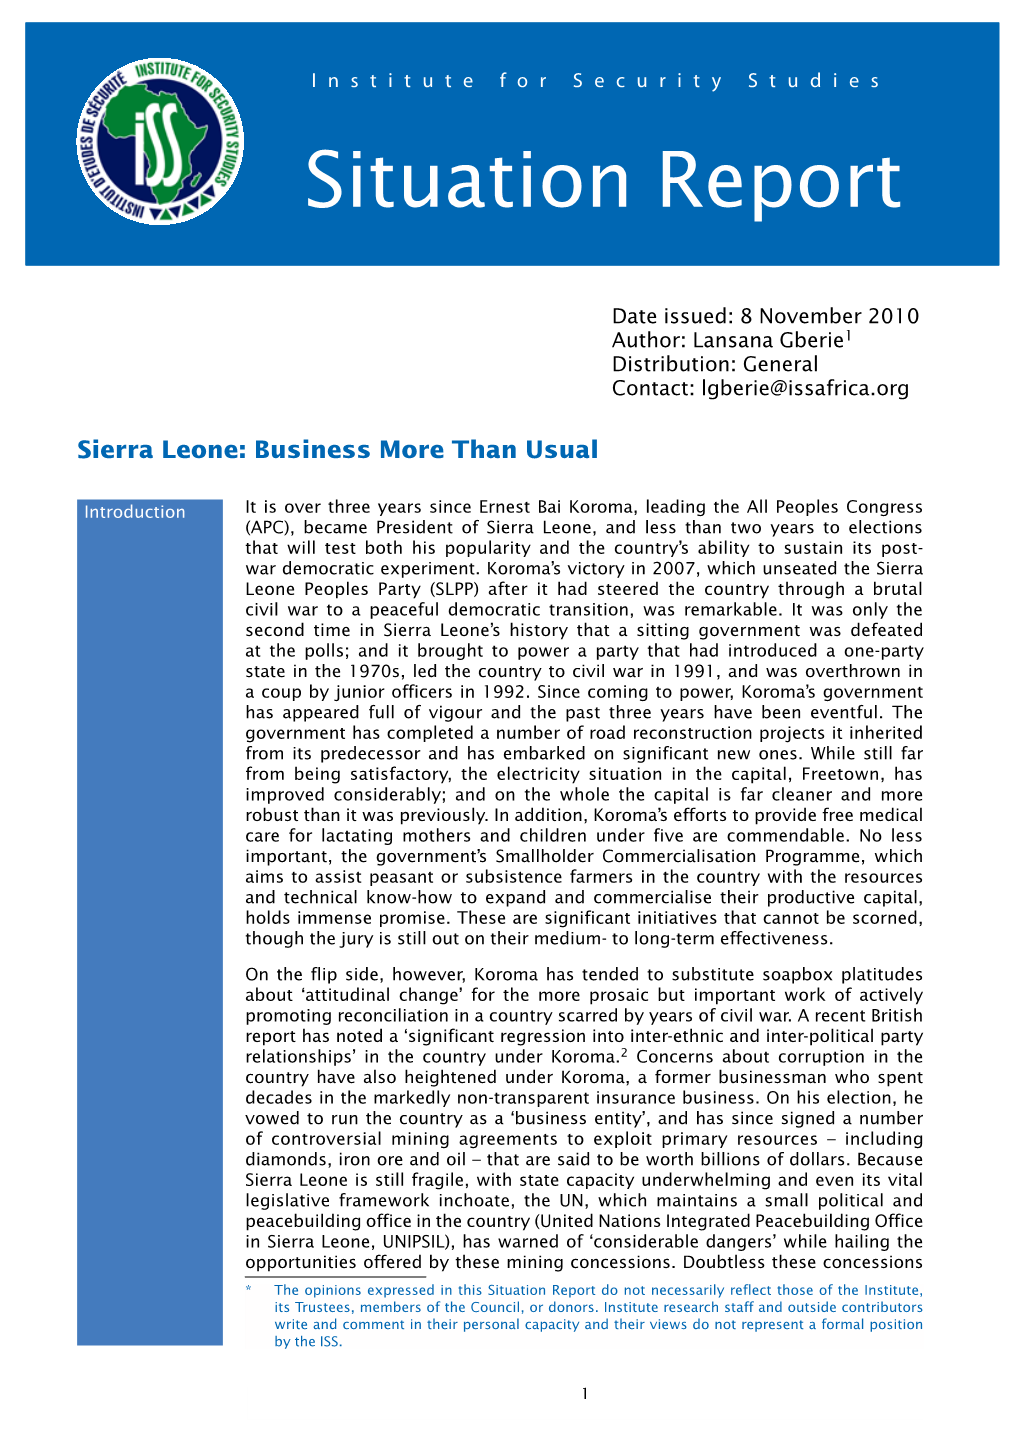 Sierra Leone: Business More Than Usual